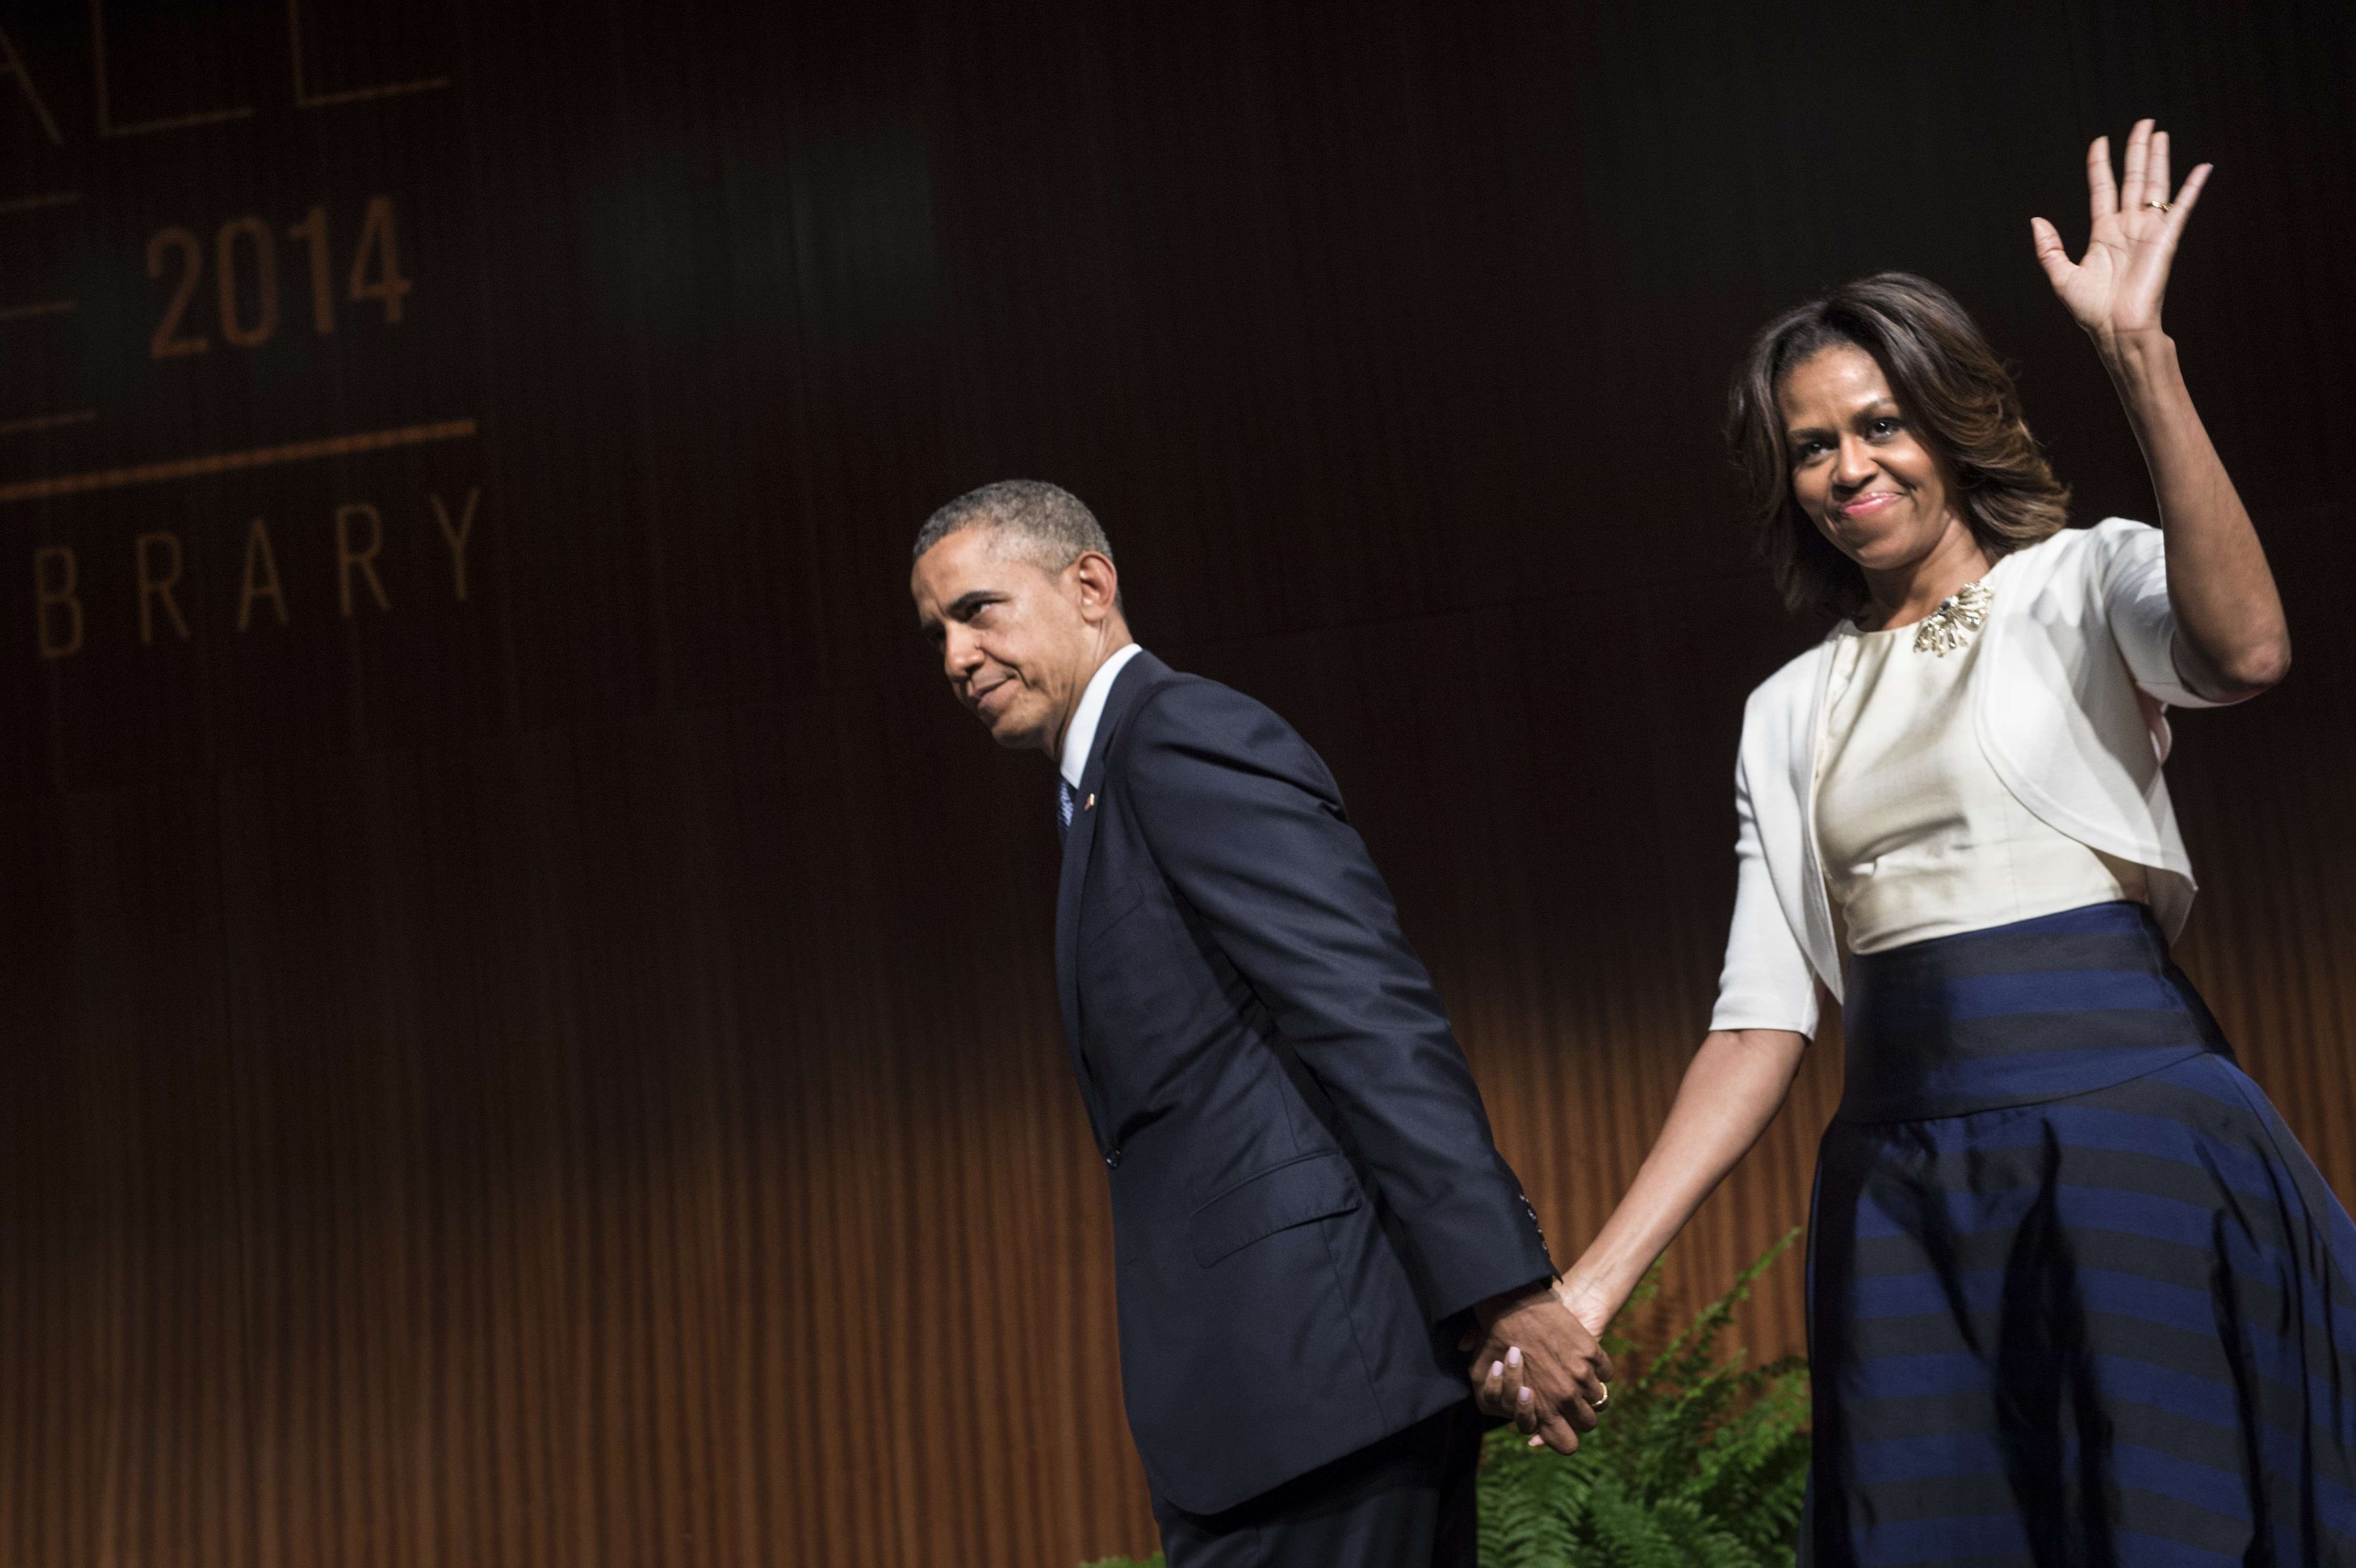 President Barack Obama leaves with first lady Michelle Obama after speaking at the Lyndon B. Johnson Presidential Library in Austin, Texas.